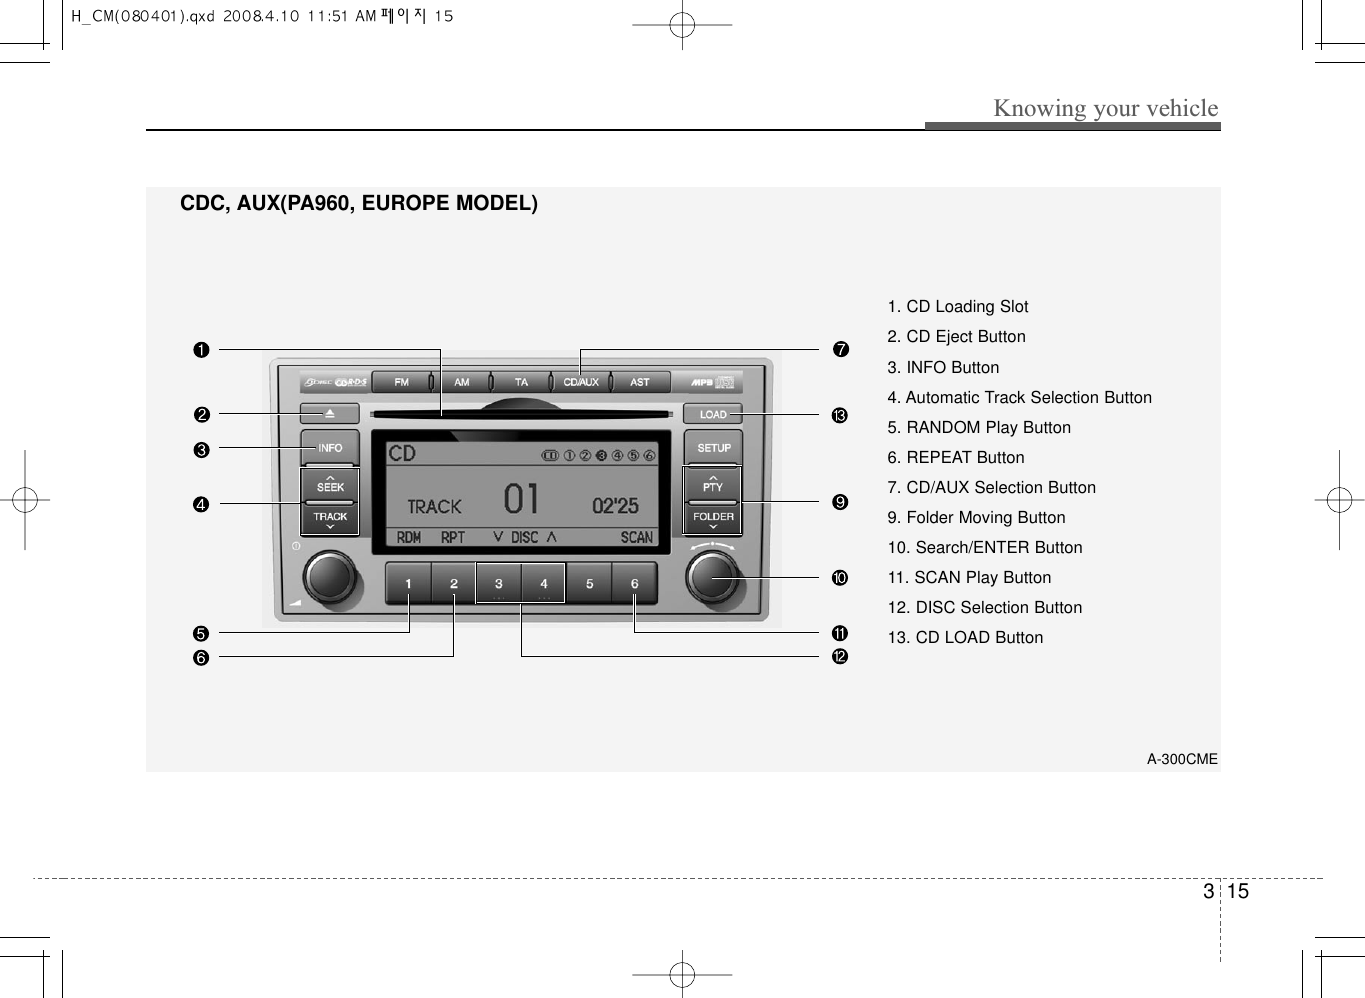 315Knowing your vehicleCDC, AUX(PA960, EUROPE MODEL)A-300CME1. CD Loading Slot2. CD Eject Button3. INFO Button4. Automatic Track Selection Button5. RANDOM Play Button6. REPEAT Button7. CD/AUX Selection Button9. Folder Moving Button10. Search/ENTER Button11. SCAN Play Button12. DISC Selection Button13. CD LOAD Button